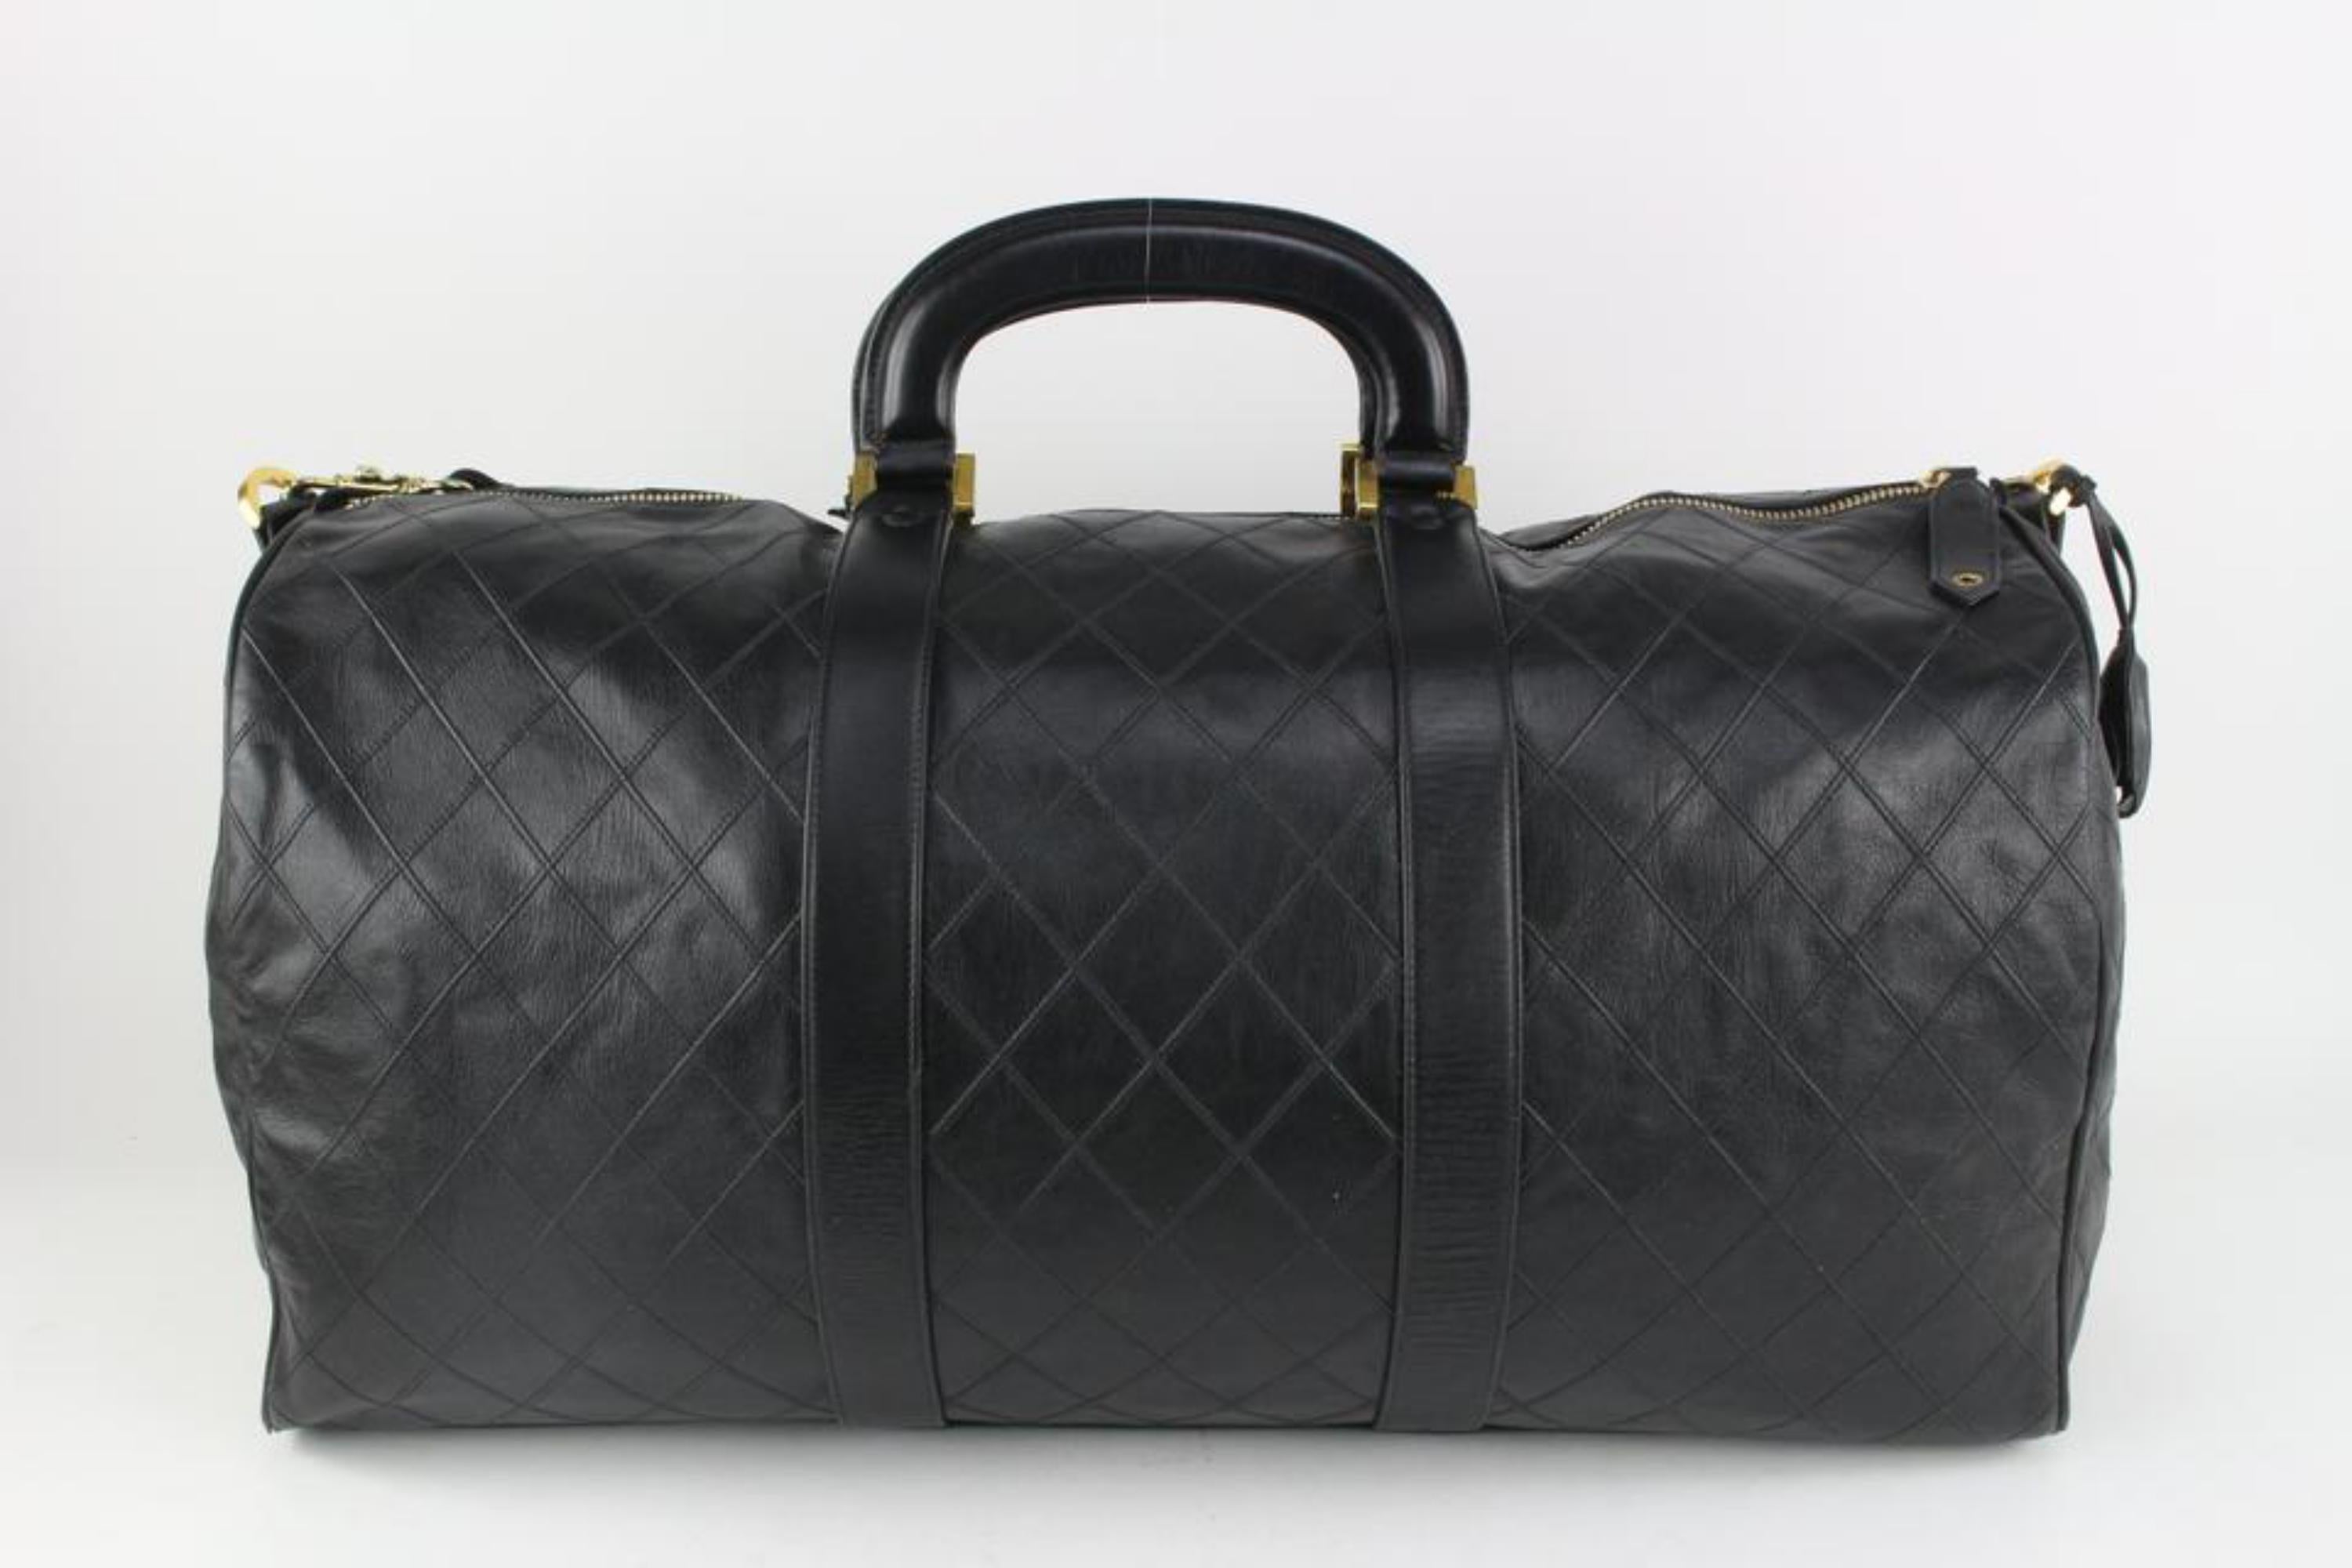 Chanel Black Quilted Lambskin Boston Duffle with Strap 1116c43 3